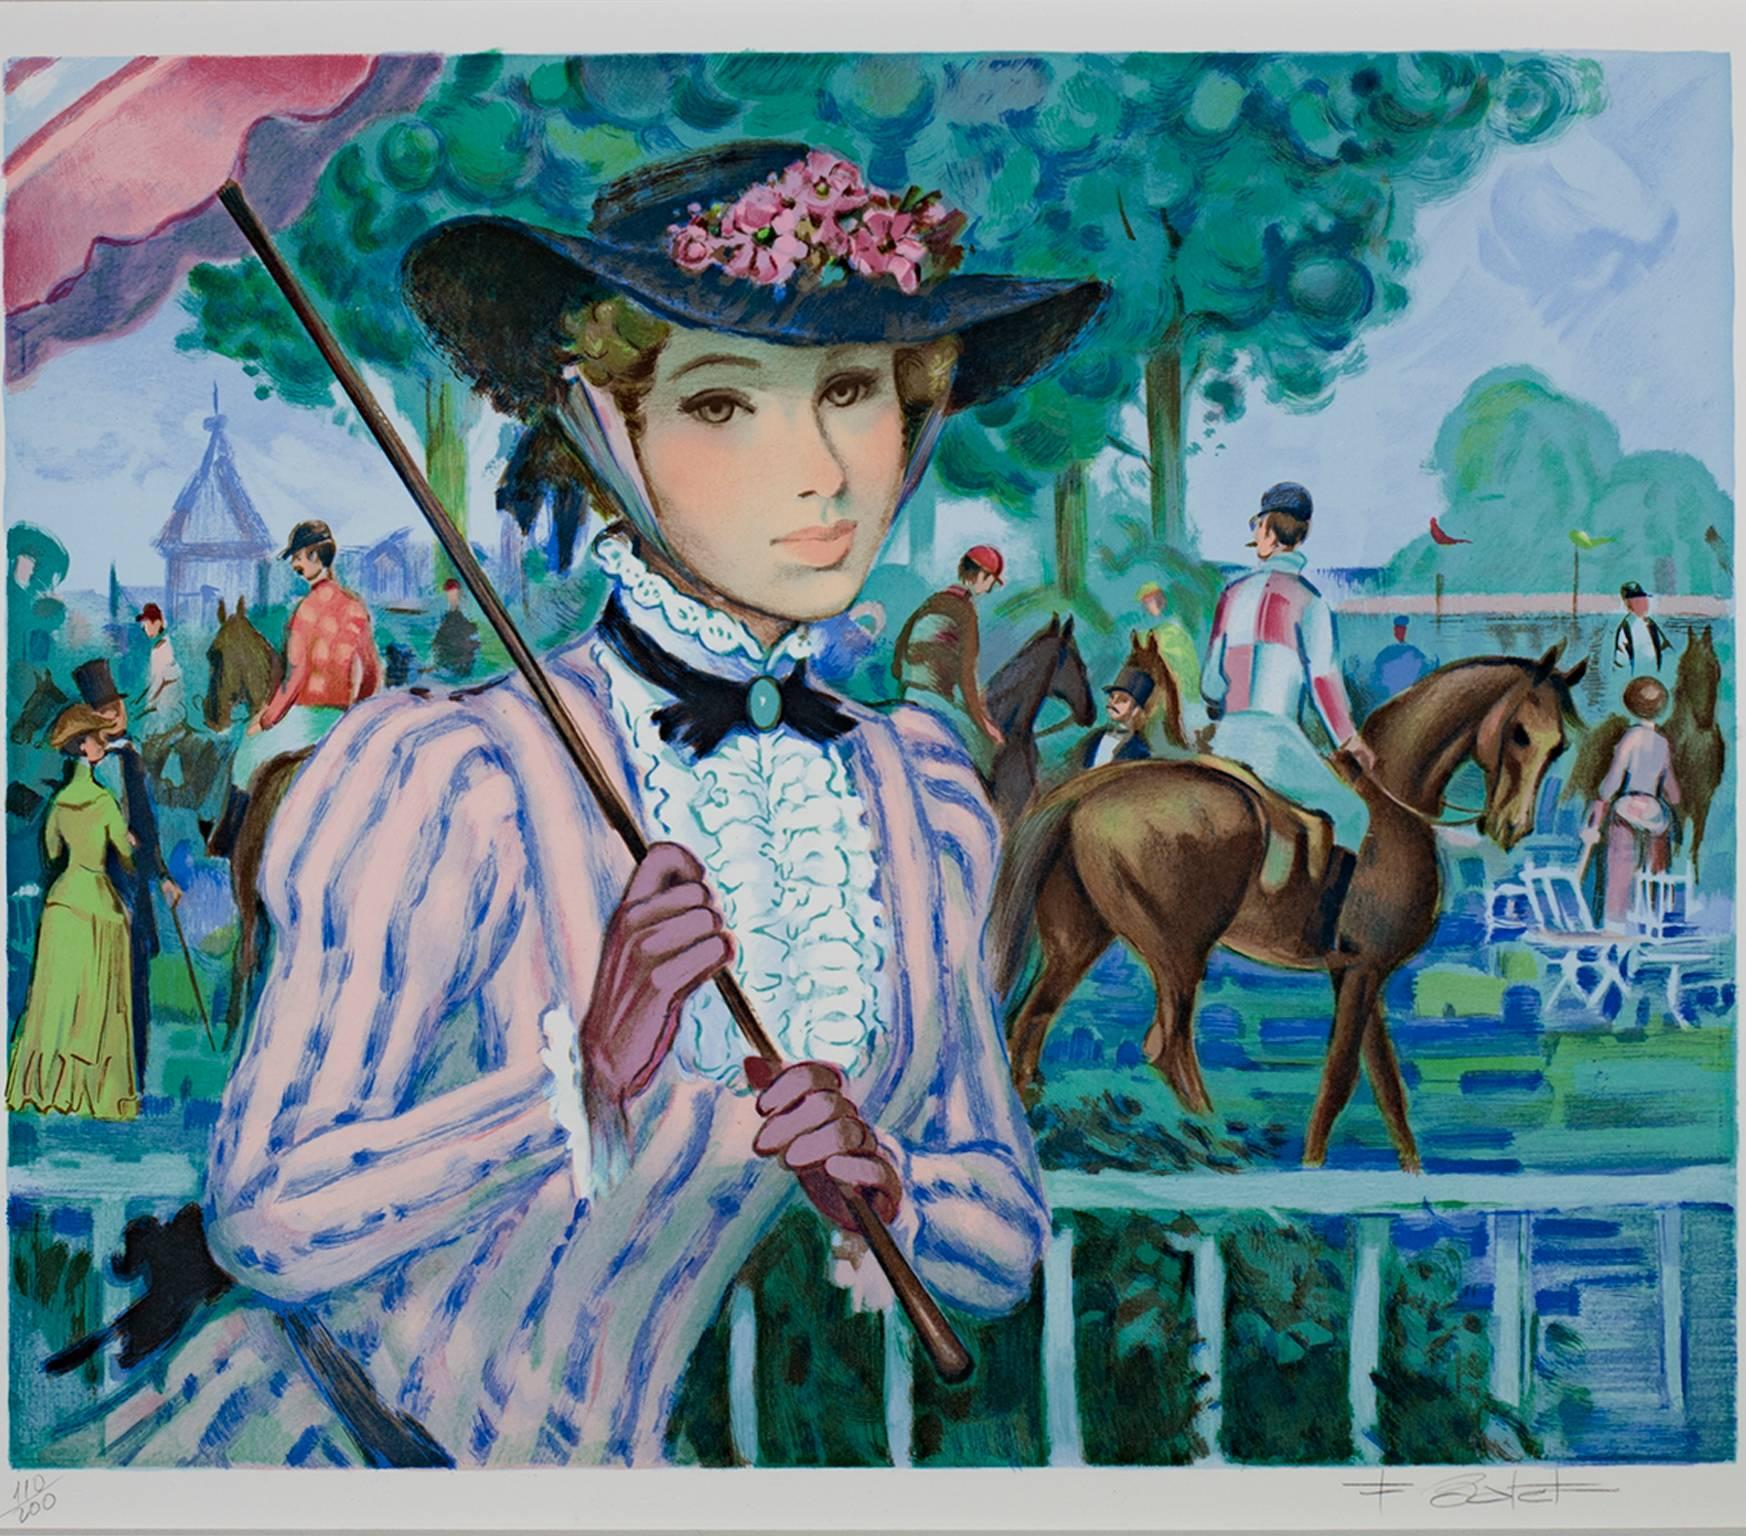 "Paddock" is an original color lithograph by Francois Batet. The artist signed the piece in the lower right and wrote the edition number (110/200) in the lower left. This piece depicts a fashionable woman in front of a horse-race track.

19 3/8" x